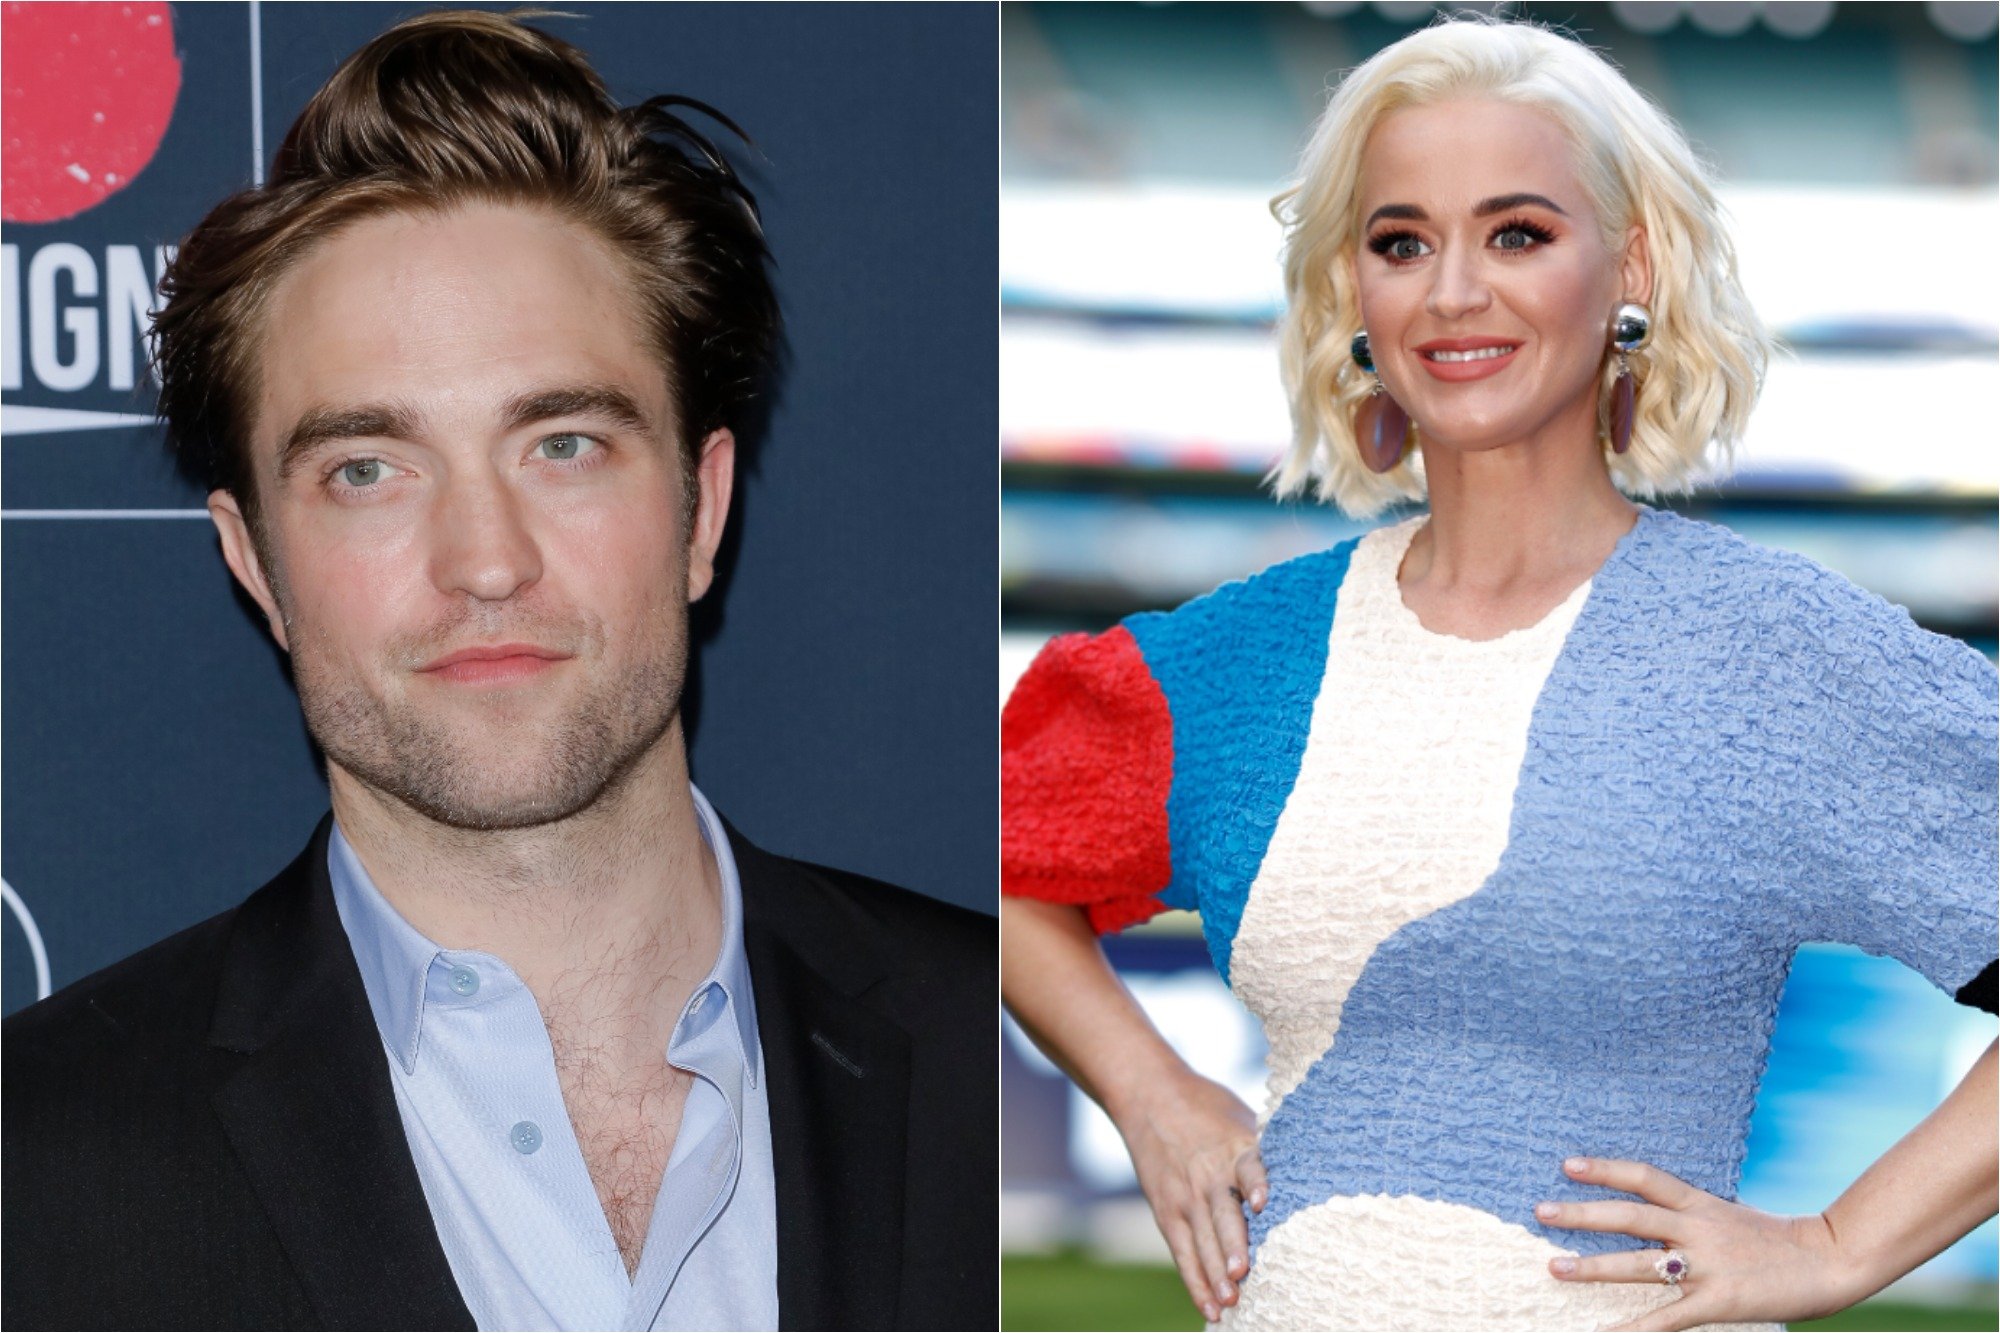 Robert Pattinson and Katy Perry Did Karaoke Together Once; Perry Was Angry  The Hilarious Video Leaked